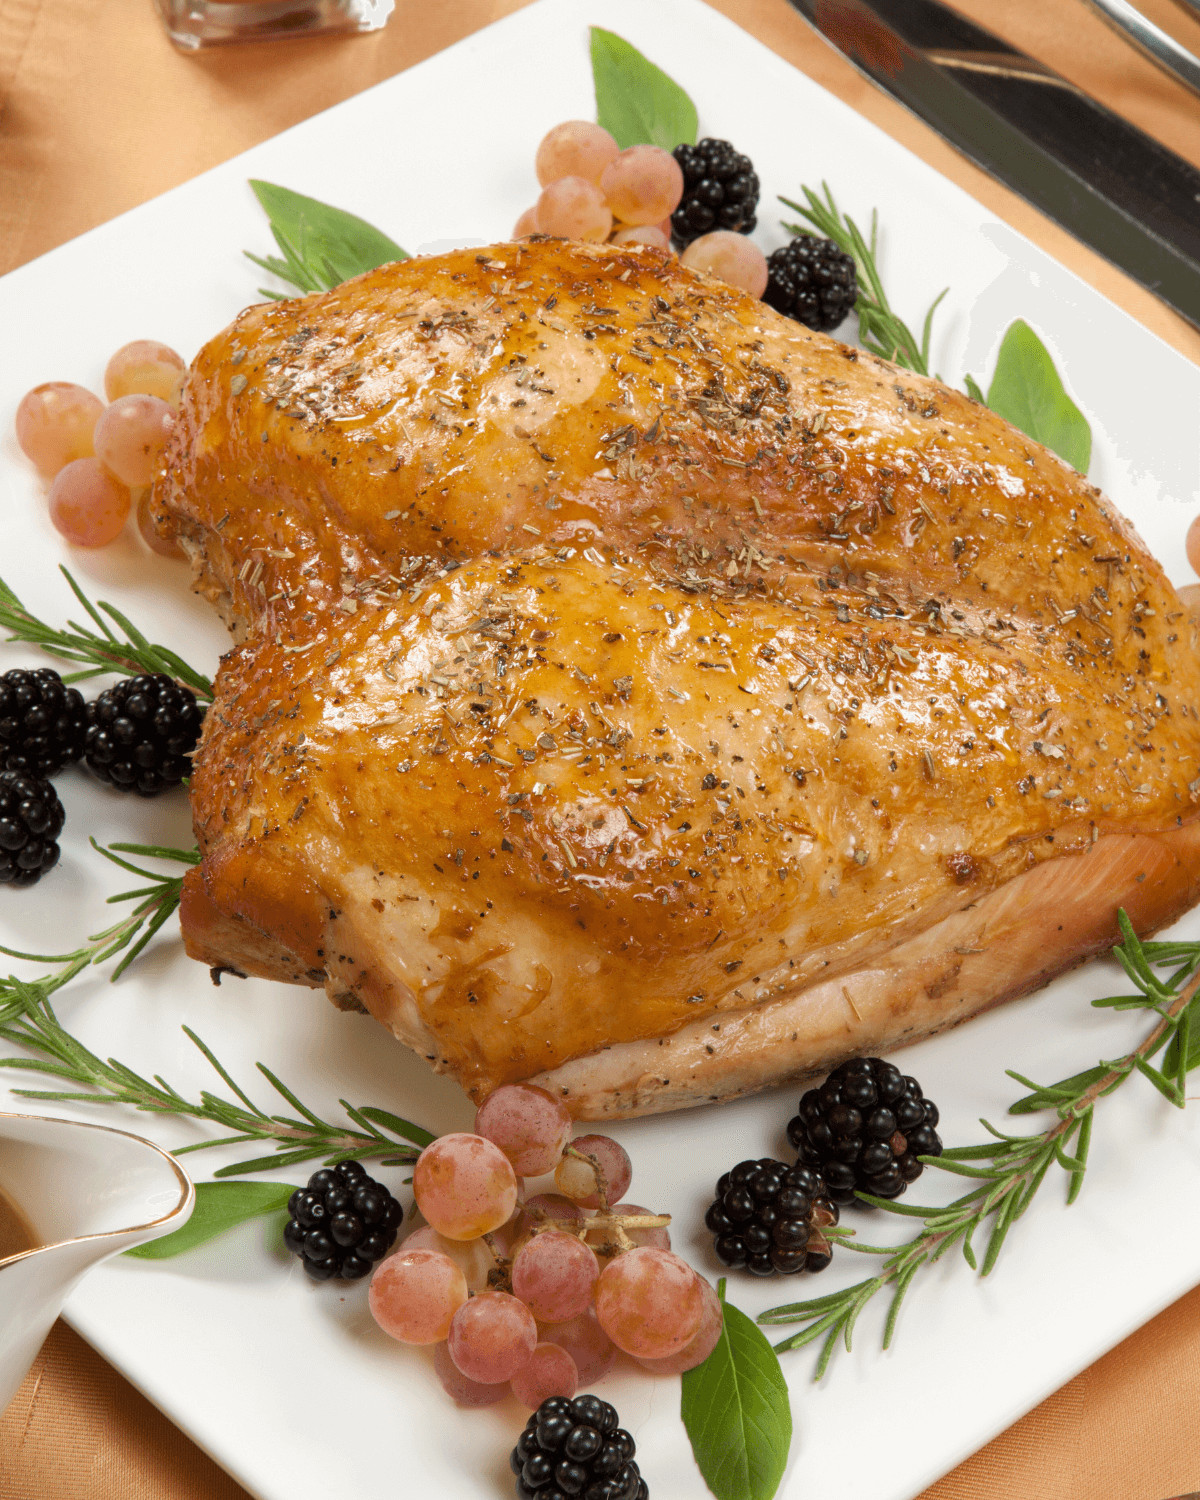 A finished slow roasted turkey breast.